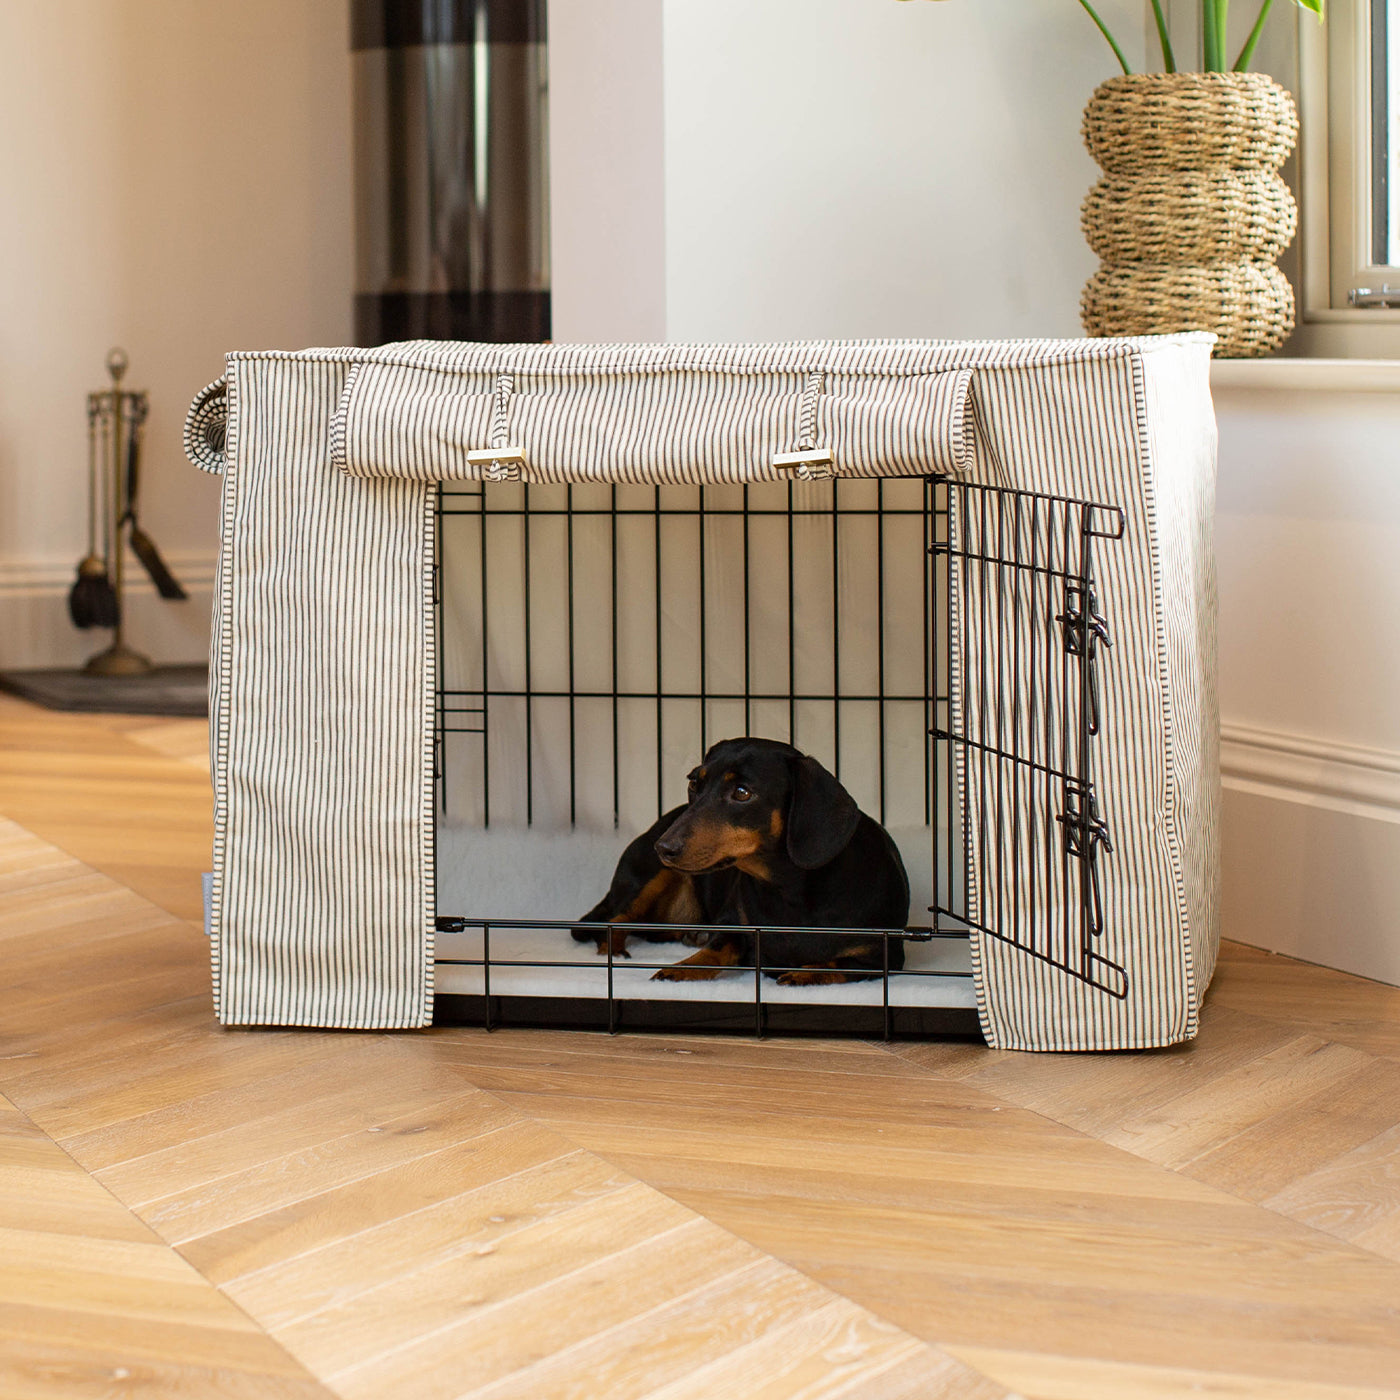 Dog Crate Accessories - Crate Covers, Crate Trays & More 